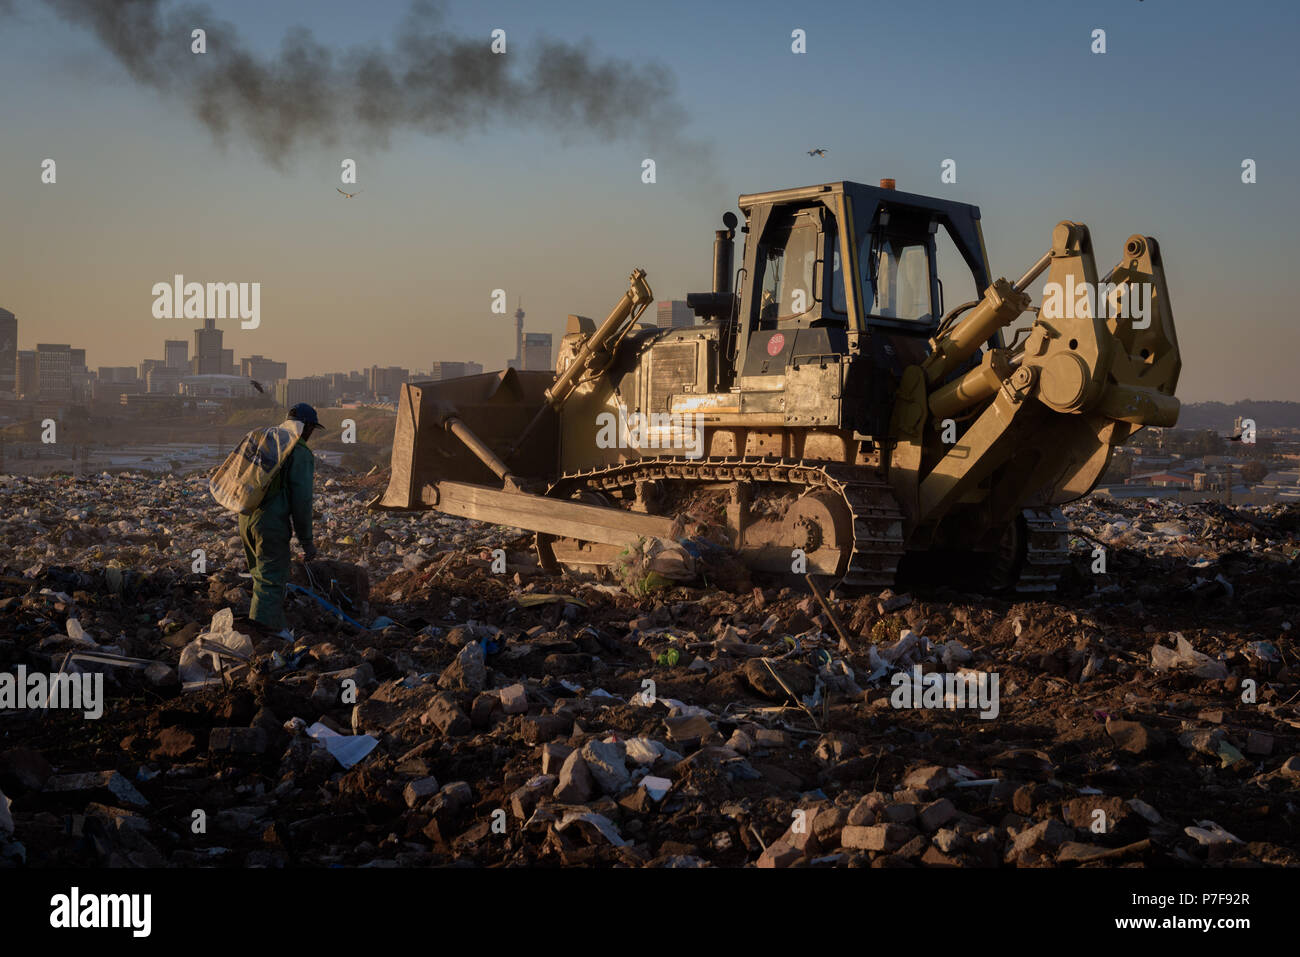 A picker following a front loader collecting recyclable refuse at the Robinson Deep landfill in South Africa's commercial capital of Johannesburg Stock Photo